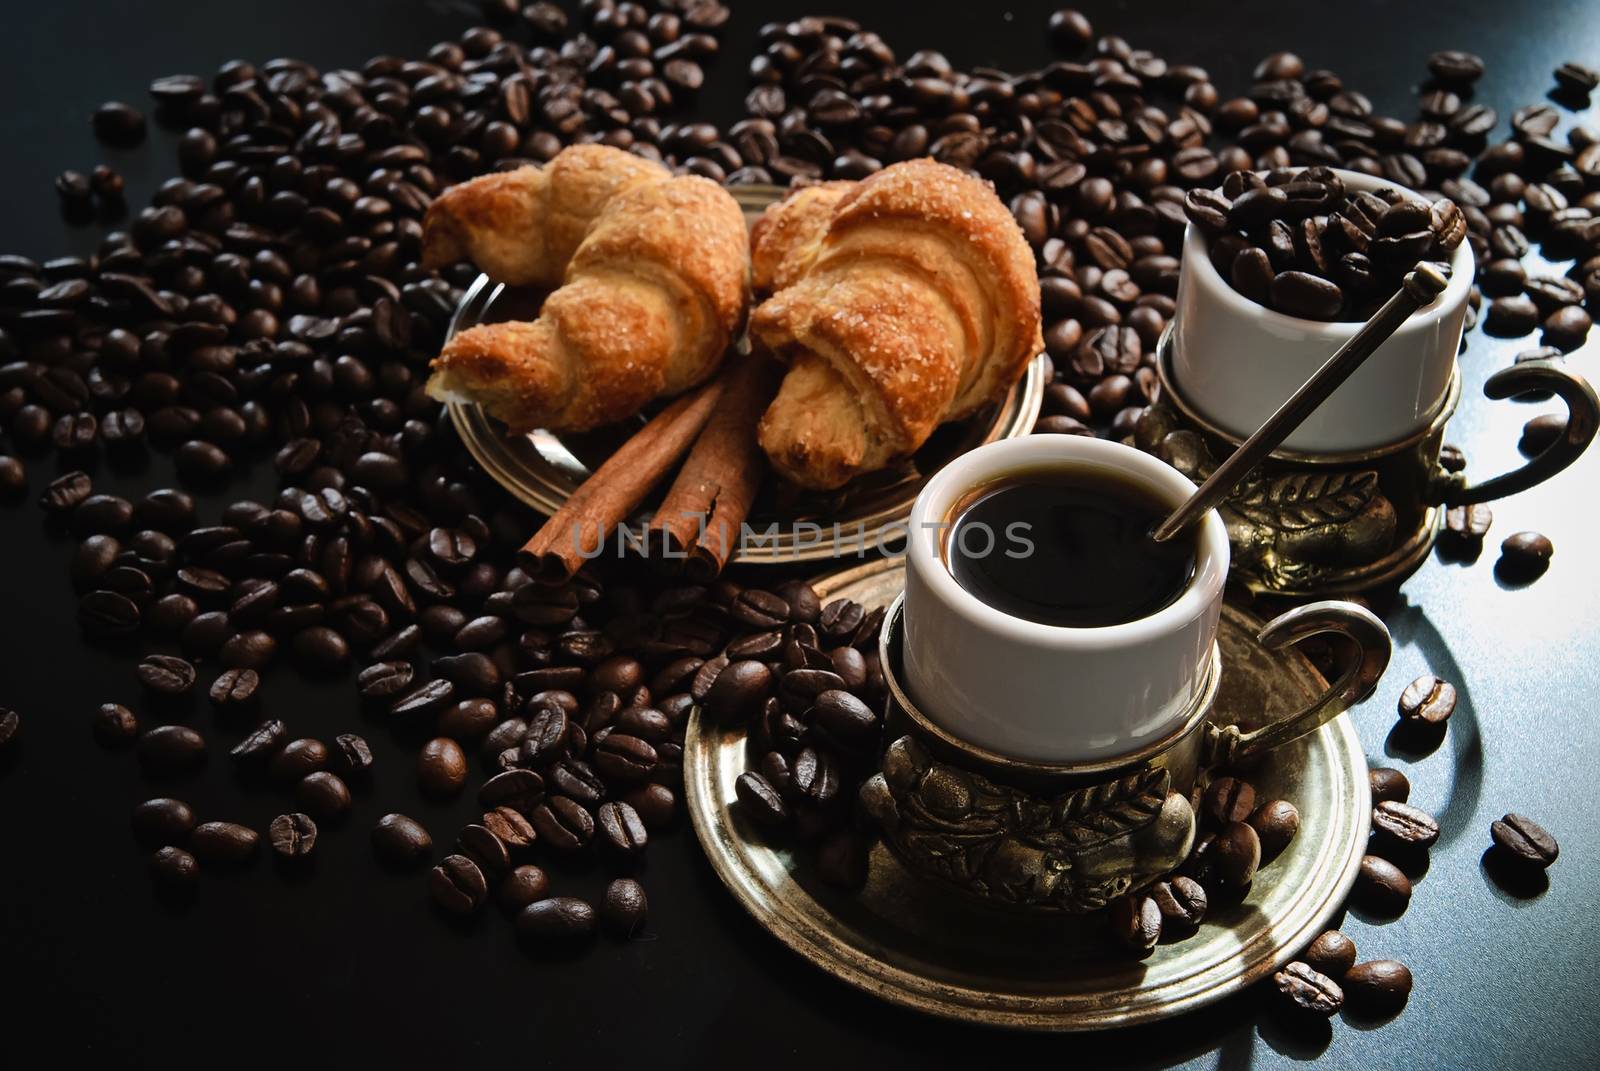 Two cups of coffee with croissants and pieces of cinnamon